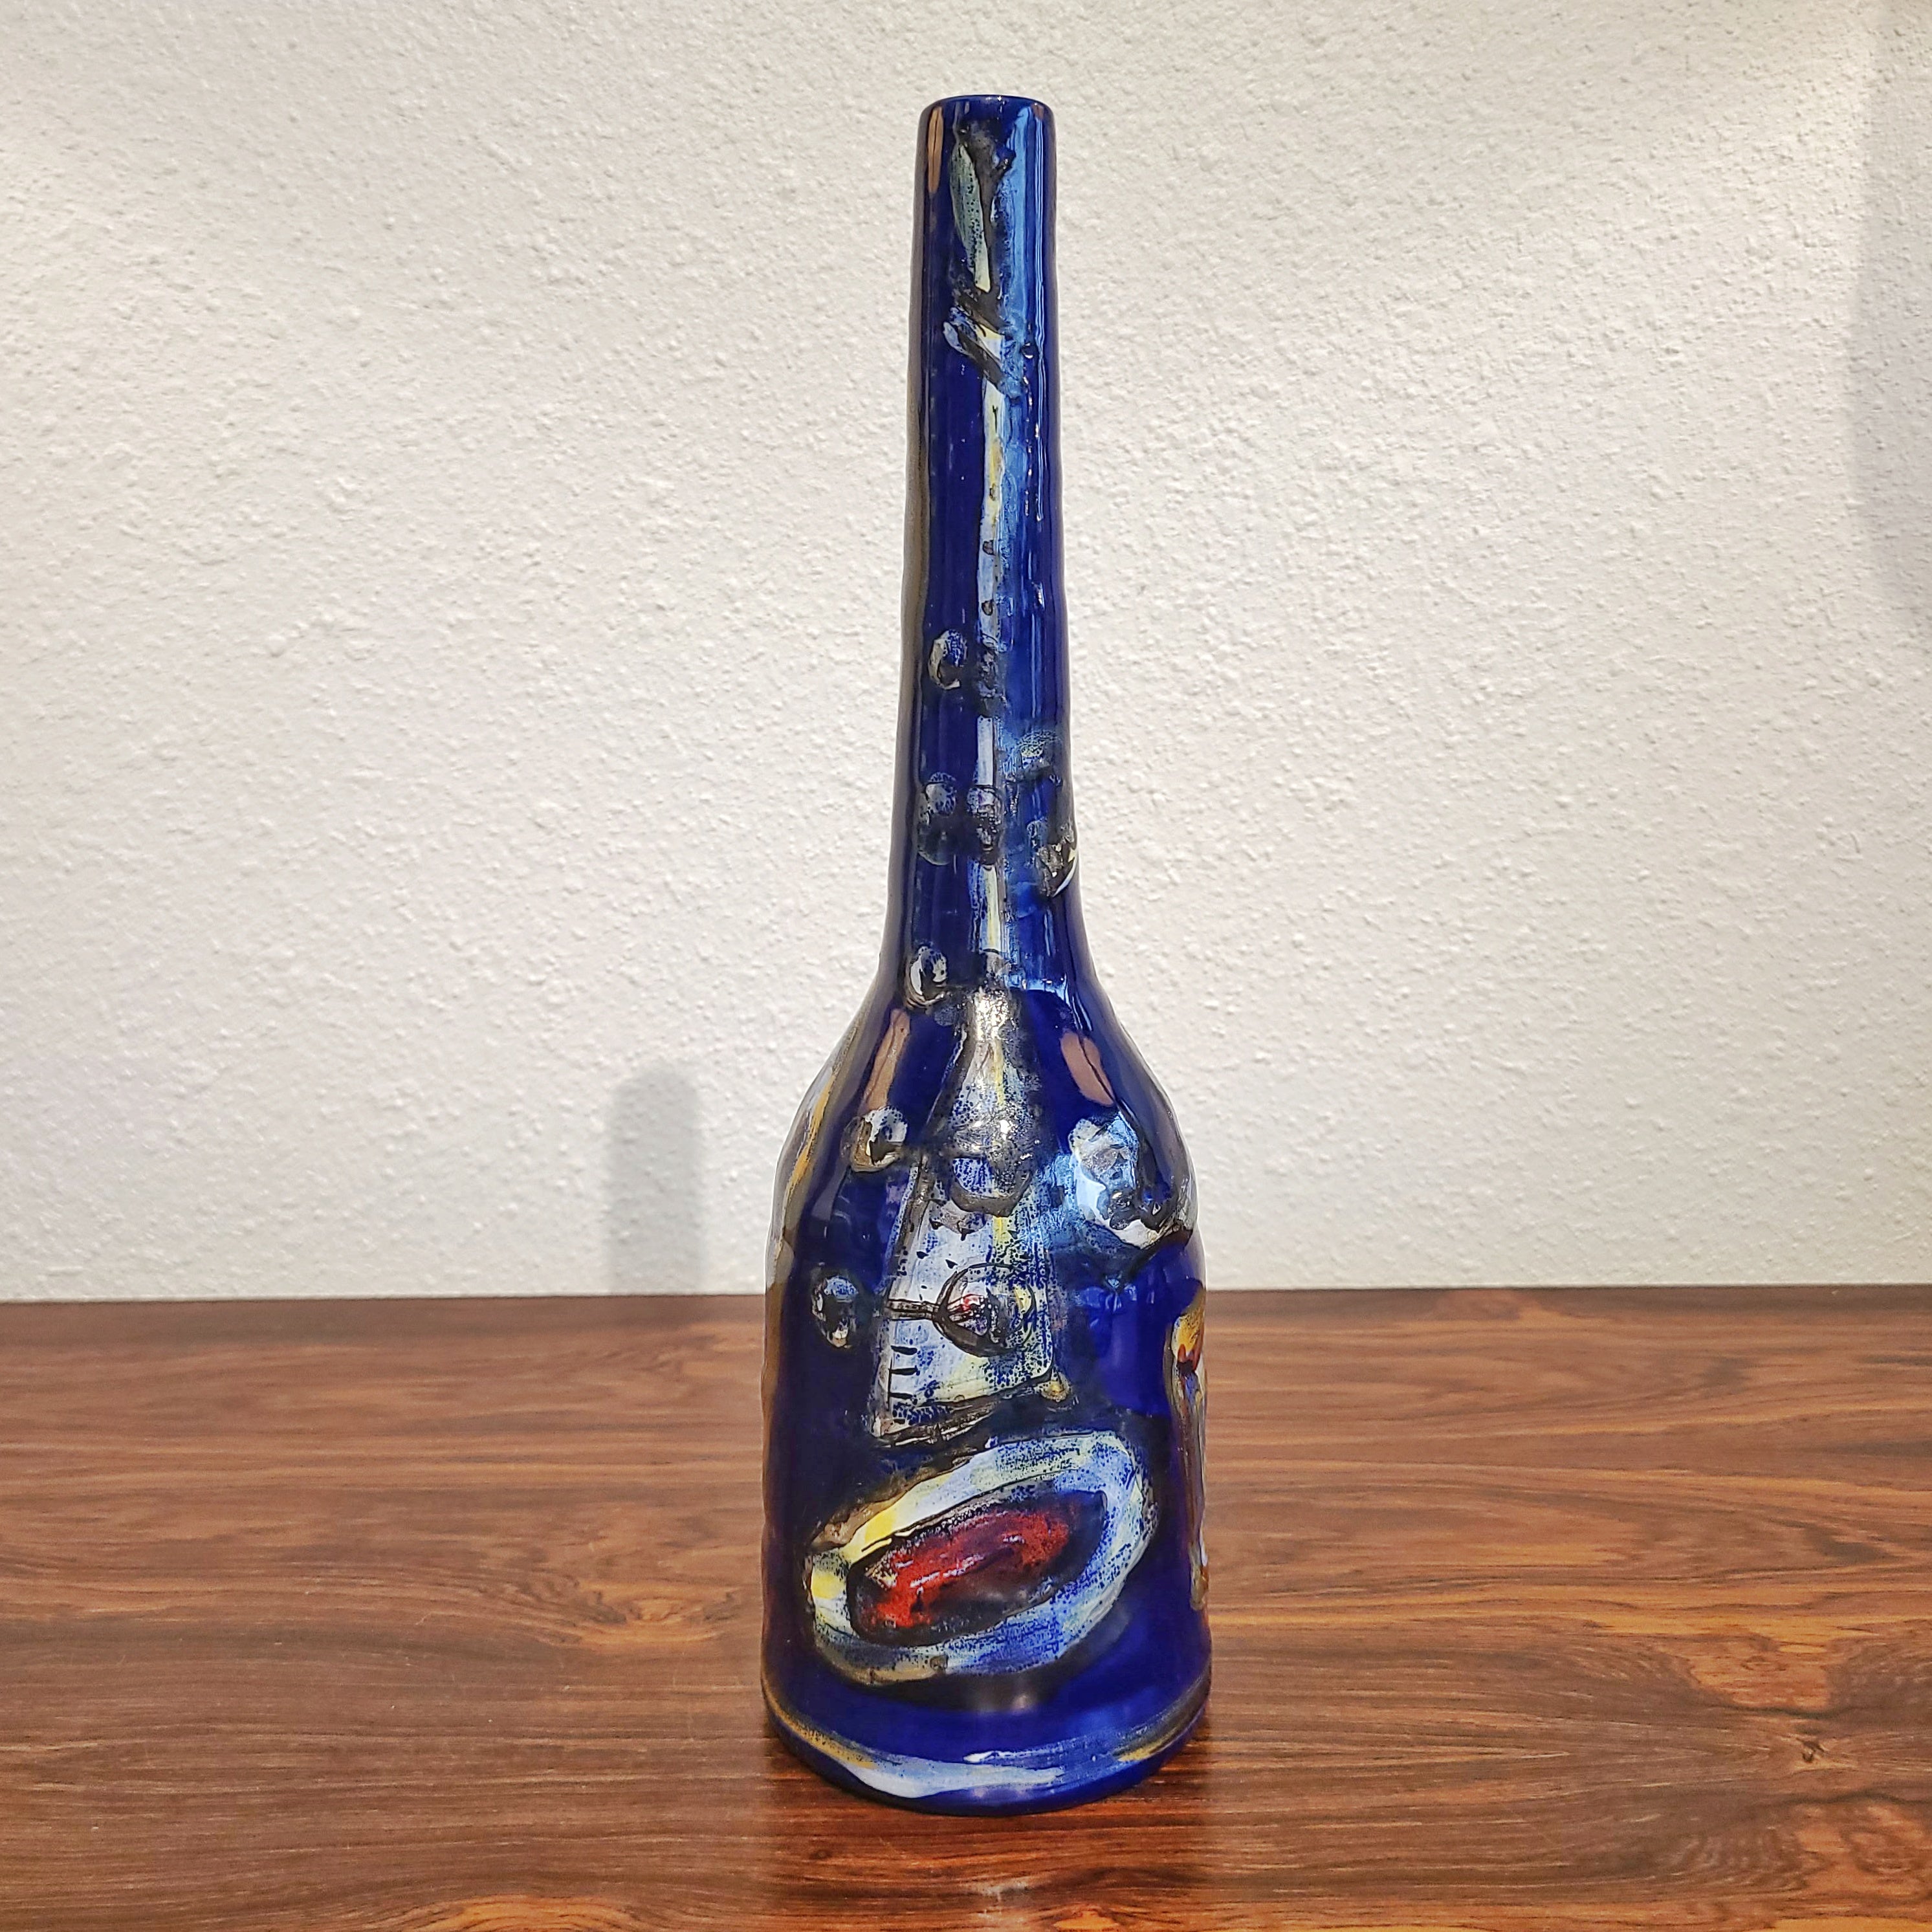 PETUCCO & TOLIO BOTTLE VASE WITH MUSICAL MOTIF MARKED "P.T. 964"